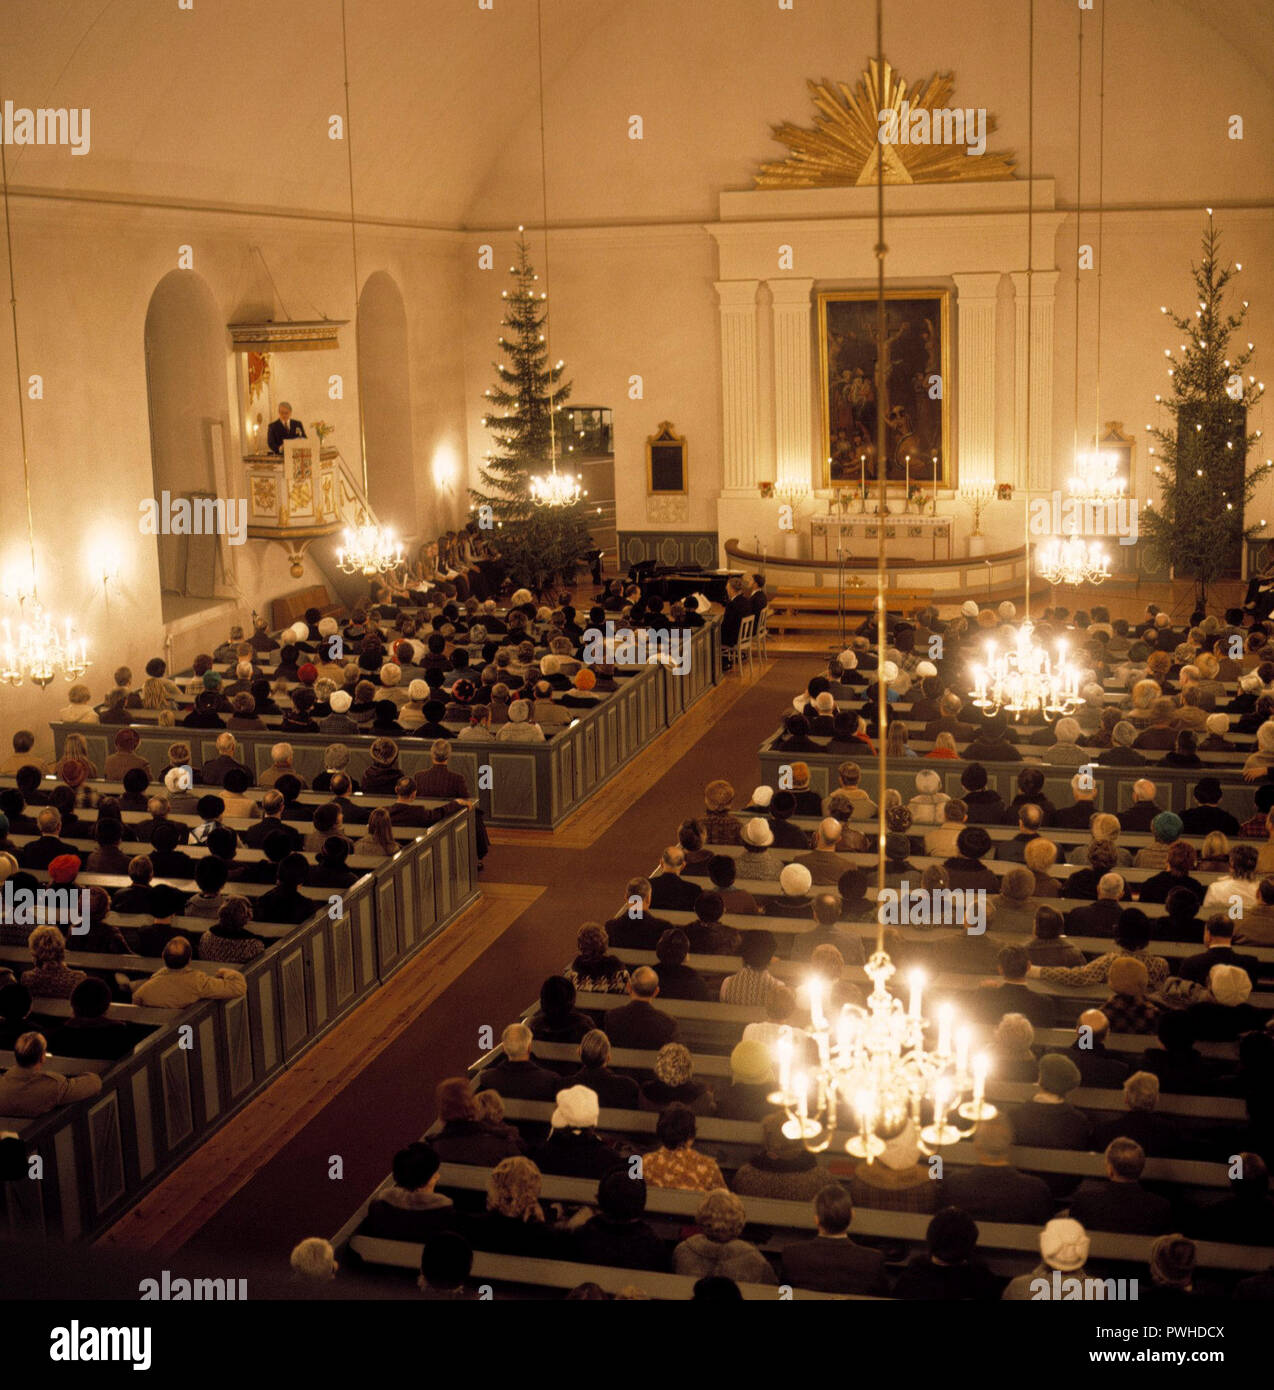 Early service on Christmas day. Interior from a church where people are sitting listening to the priest. The church is decorated with christmas trees. Sweden 1970s Stock Photo